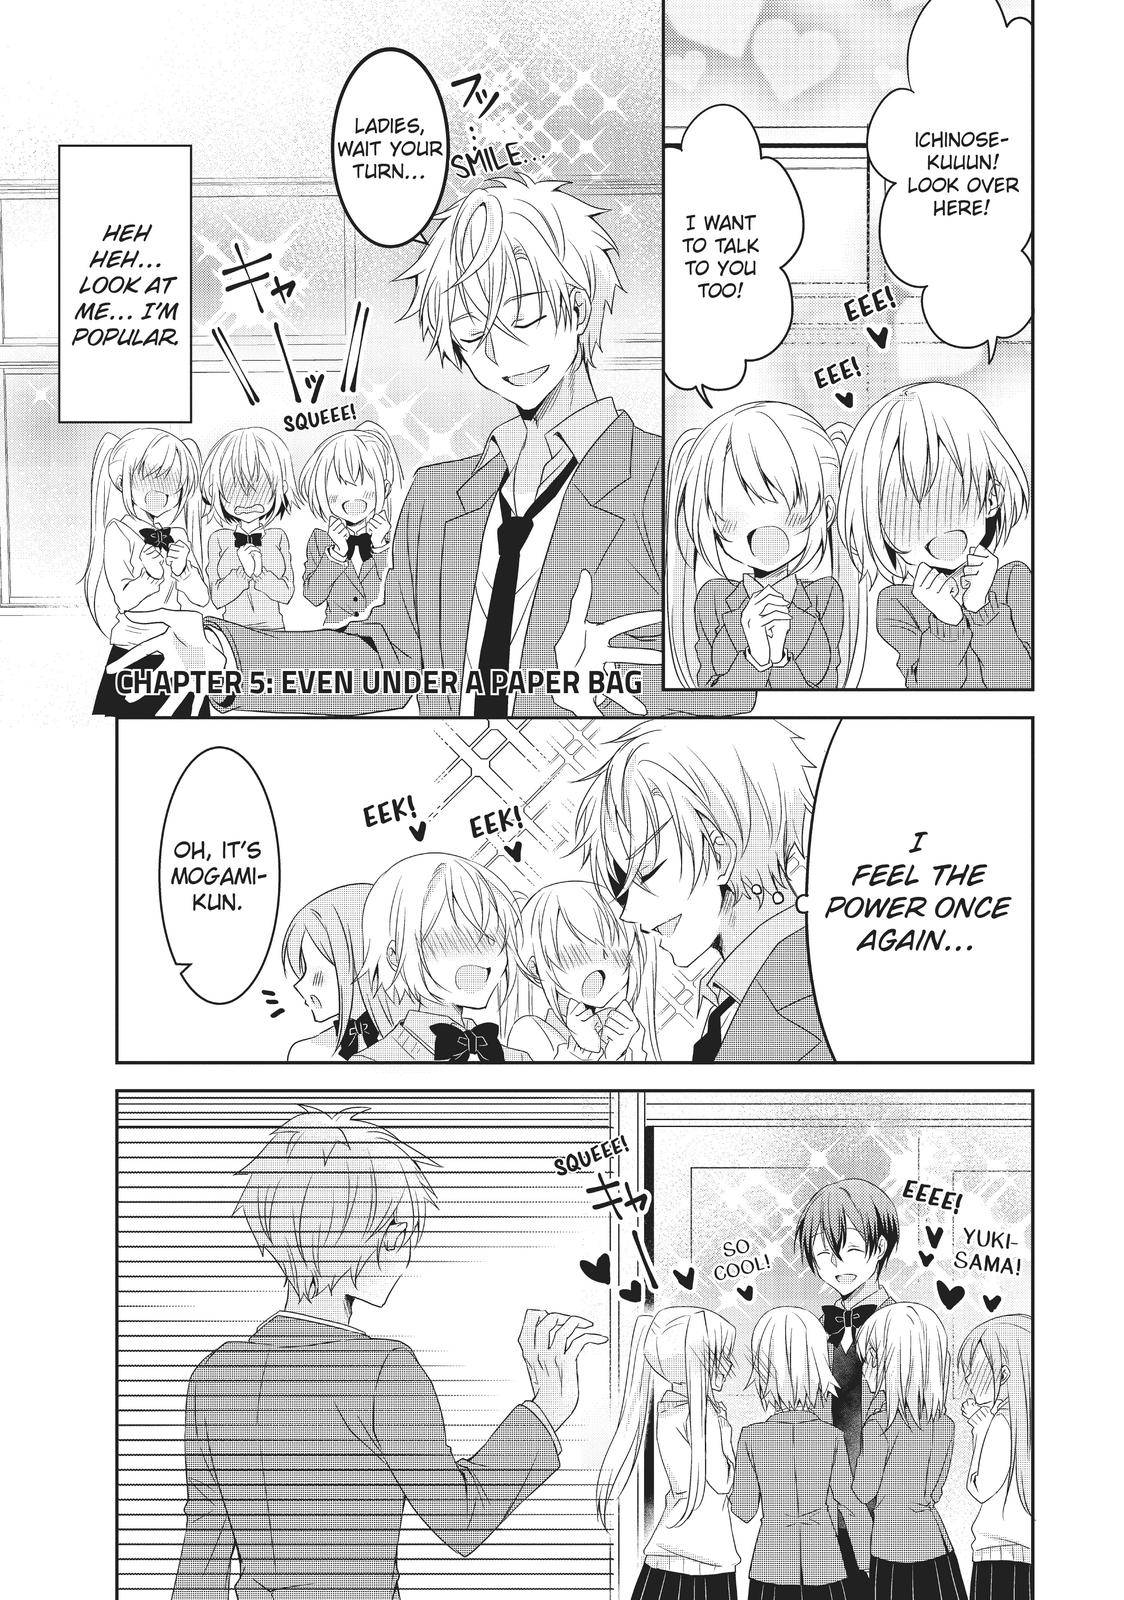 The Story Of The Girl I Like Being Too Ikemen - chapter 5 - #1